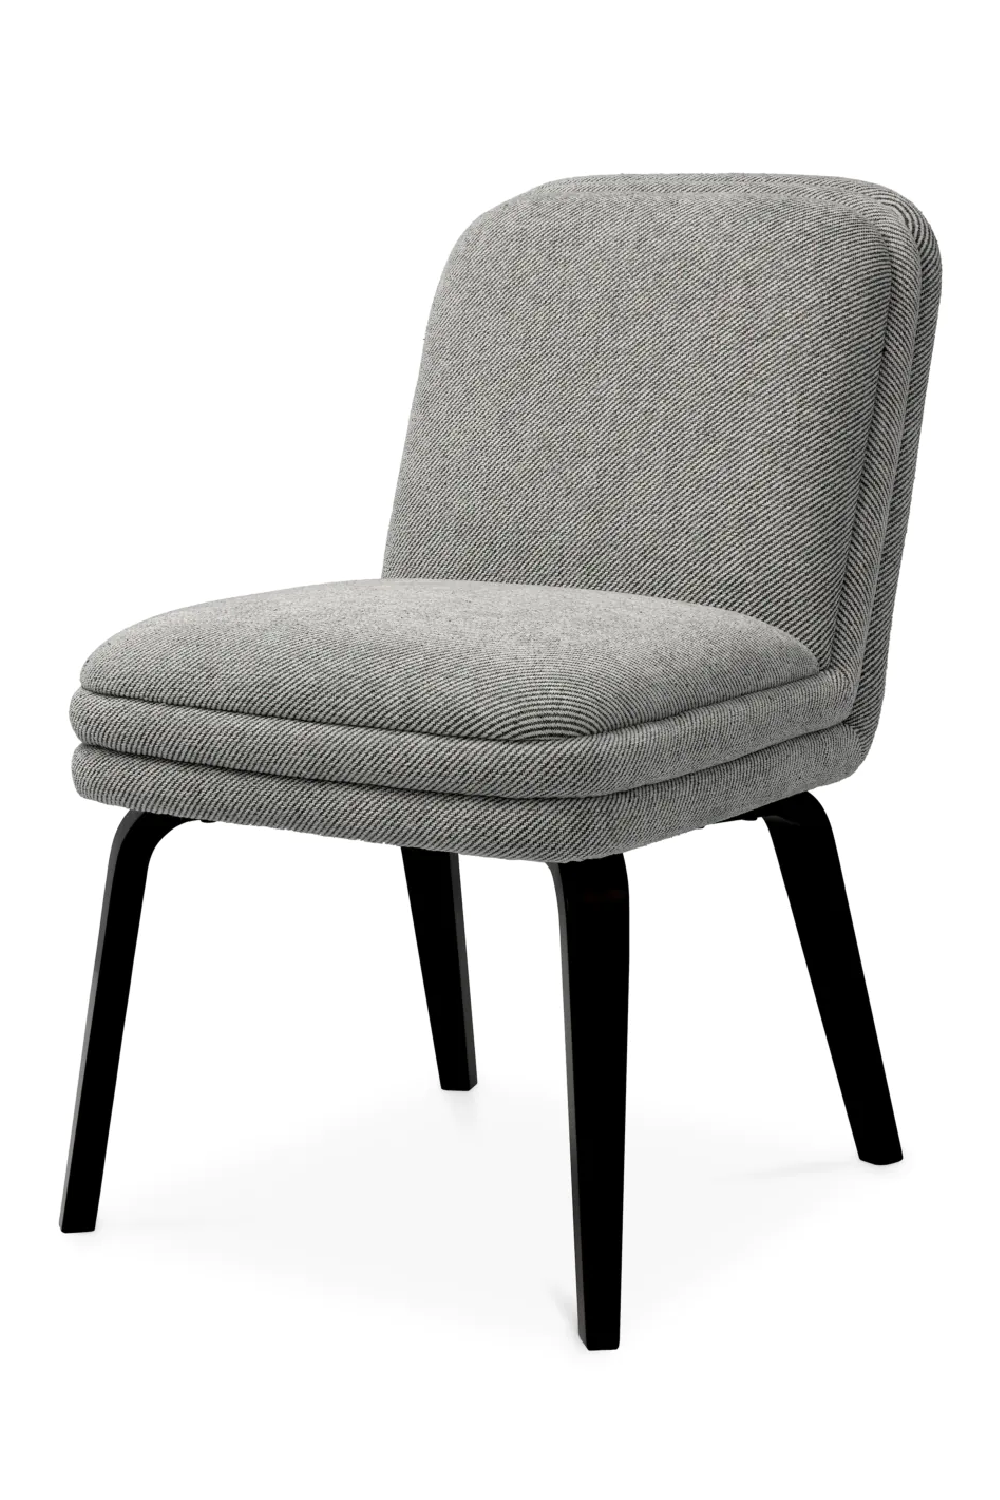 Gray Upholstered Dining Chair | Eichholtz Lucia | Oroa.com